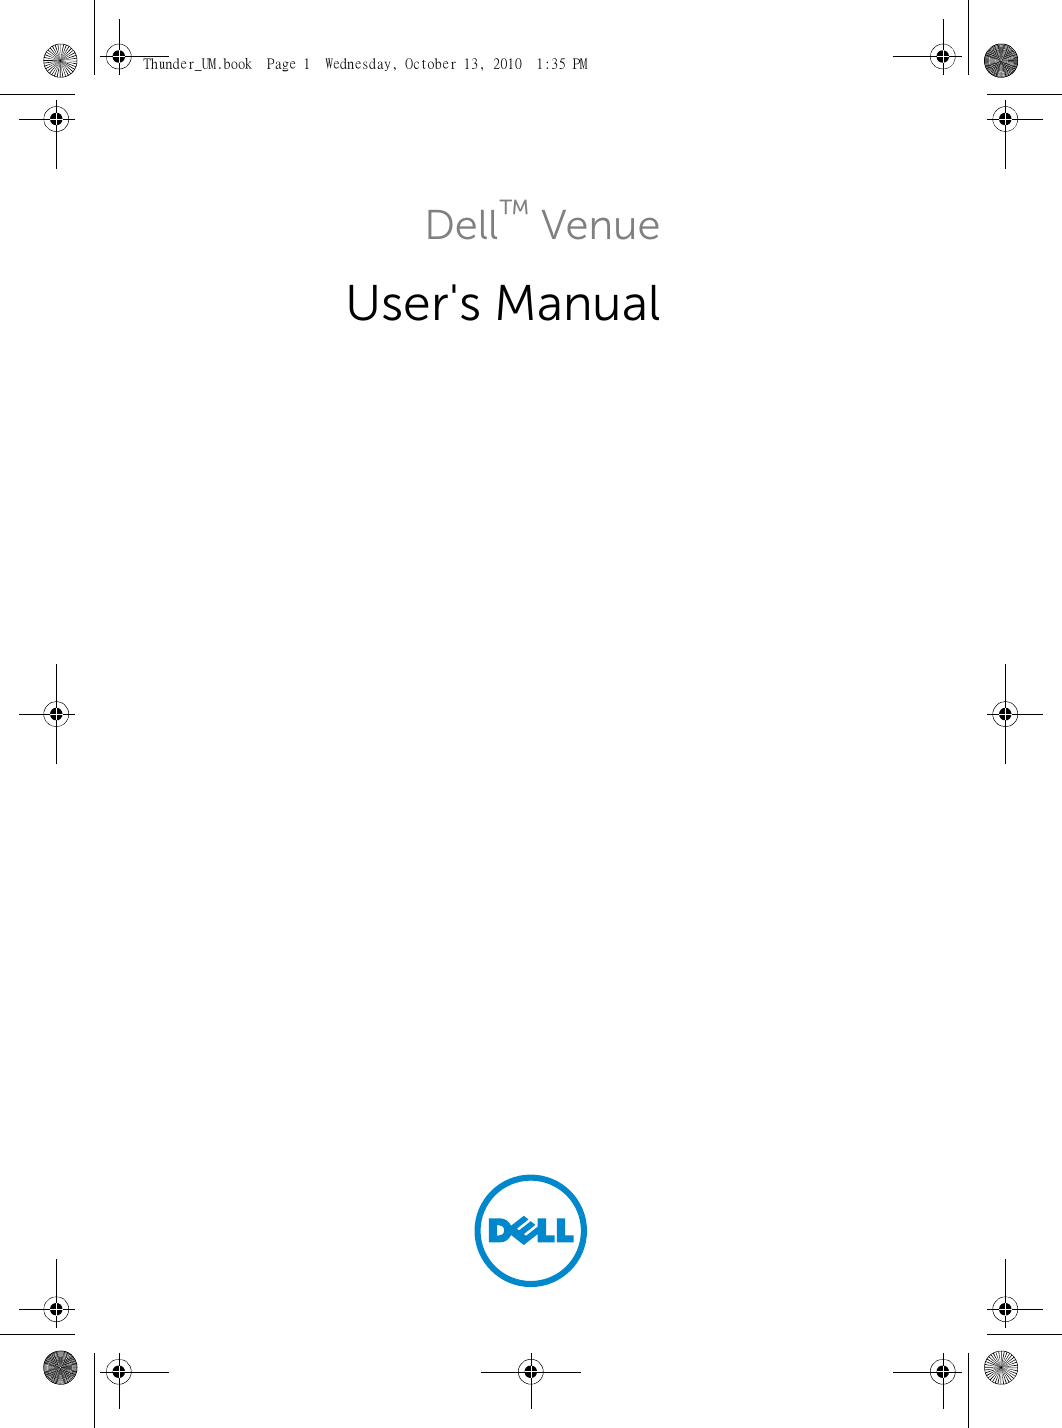 Dell™ VenueUser&apos;s ManualCOMMENT Thunder_UM.book  Page 1  Wednesday, October 13, 2010  1:35 PM